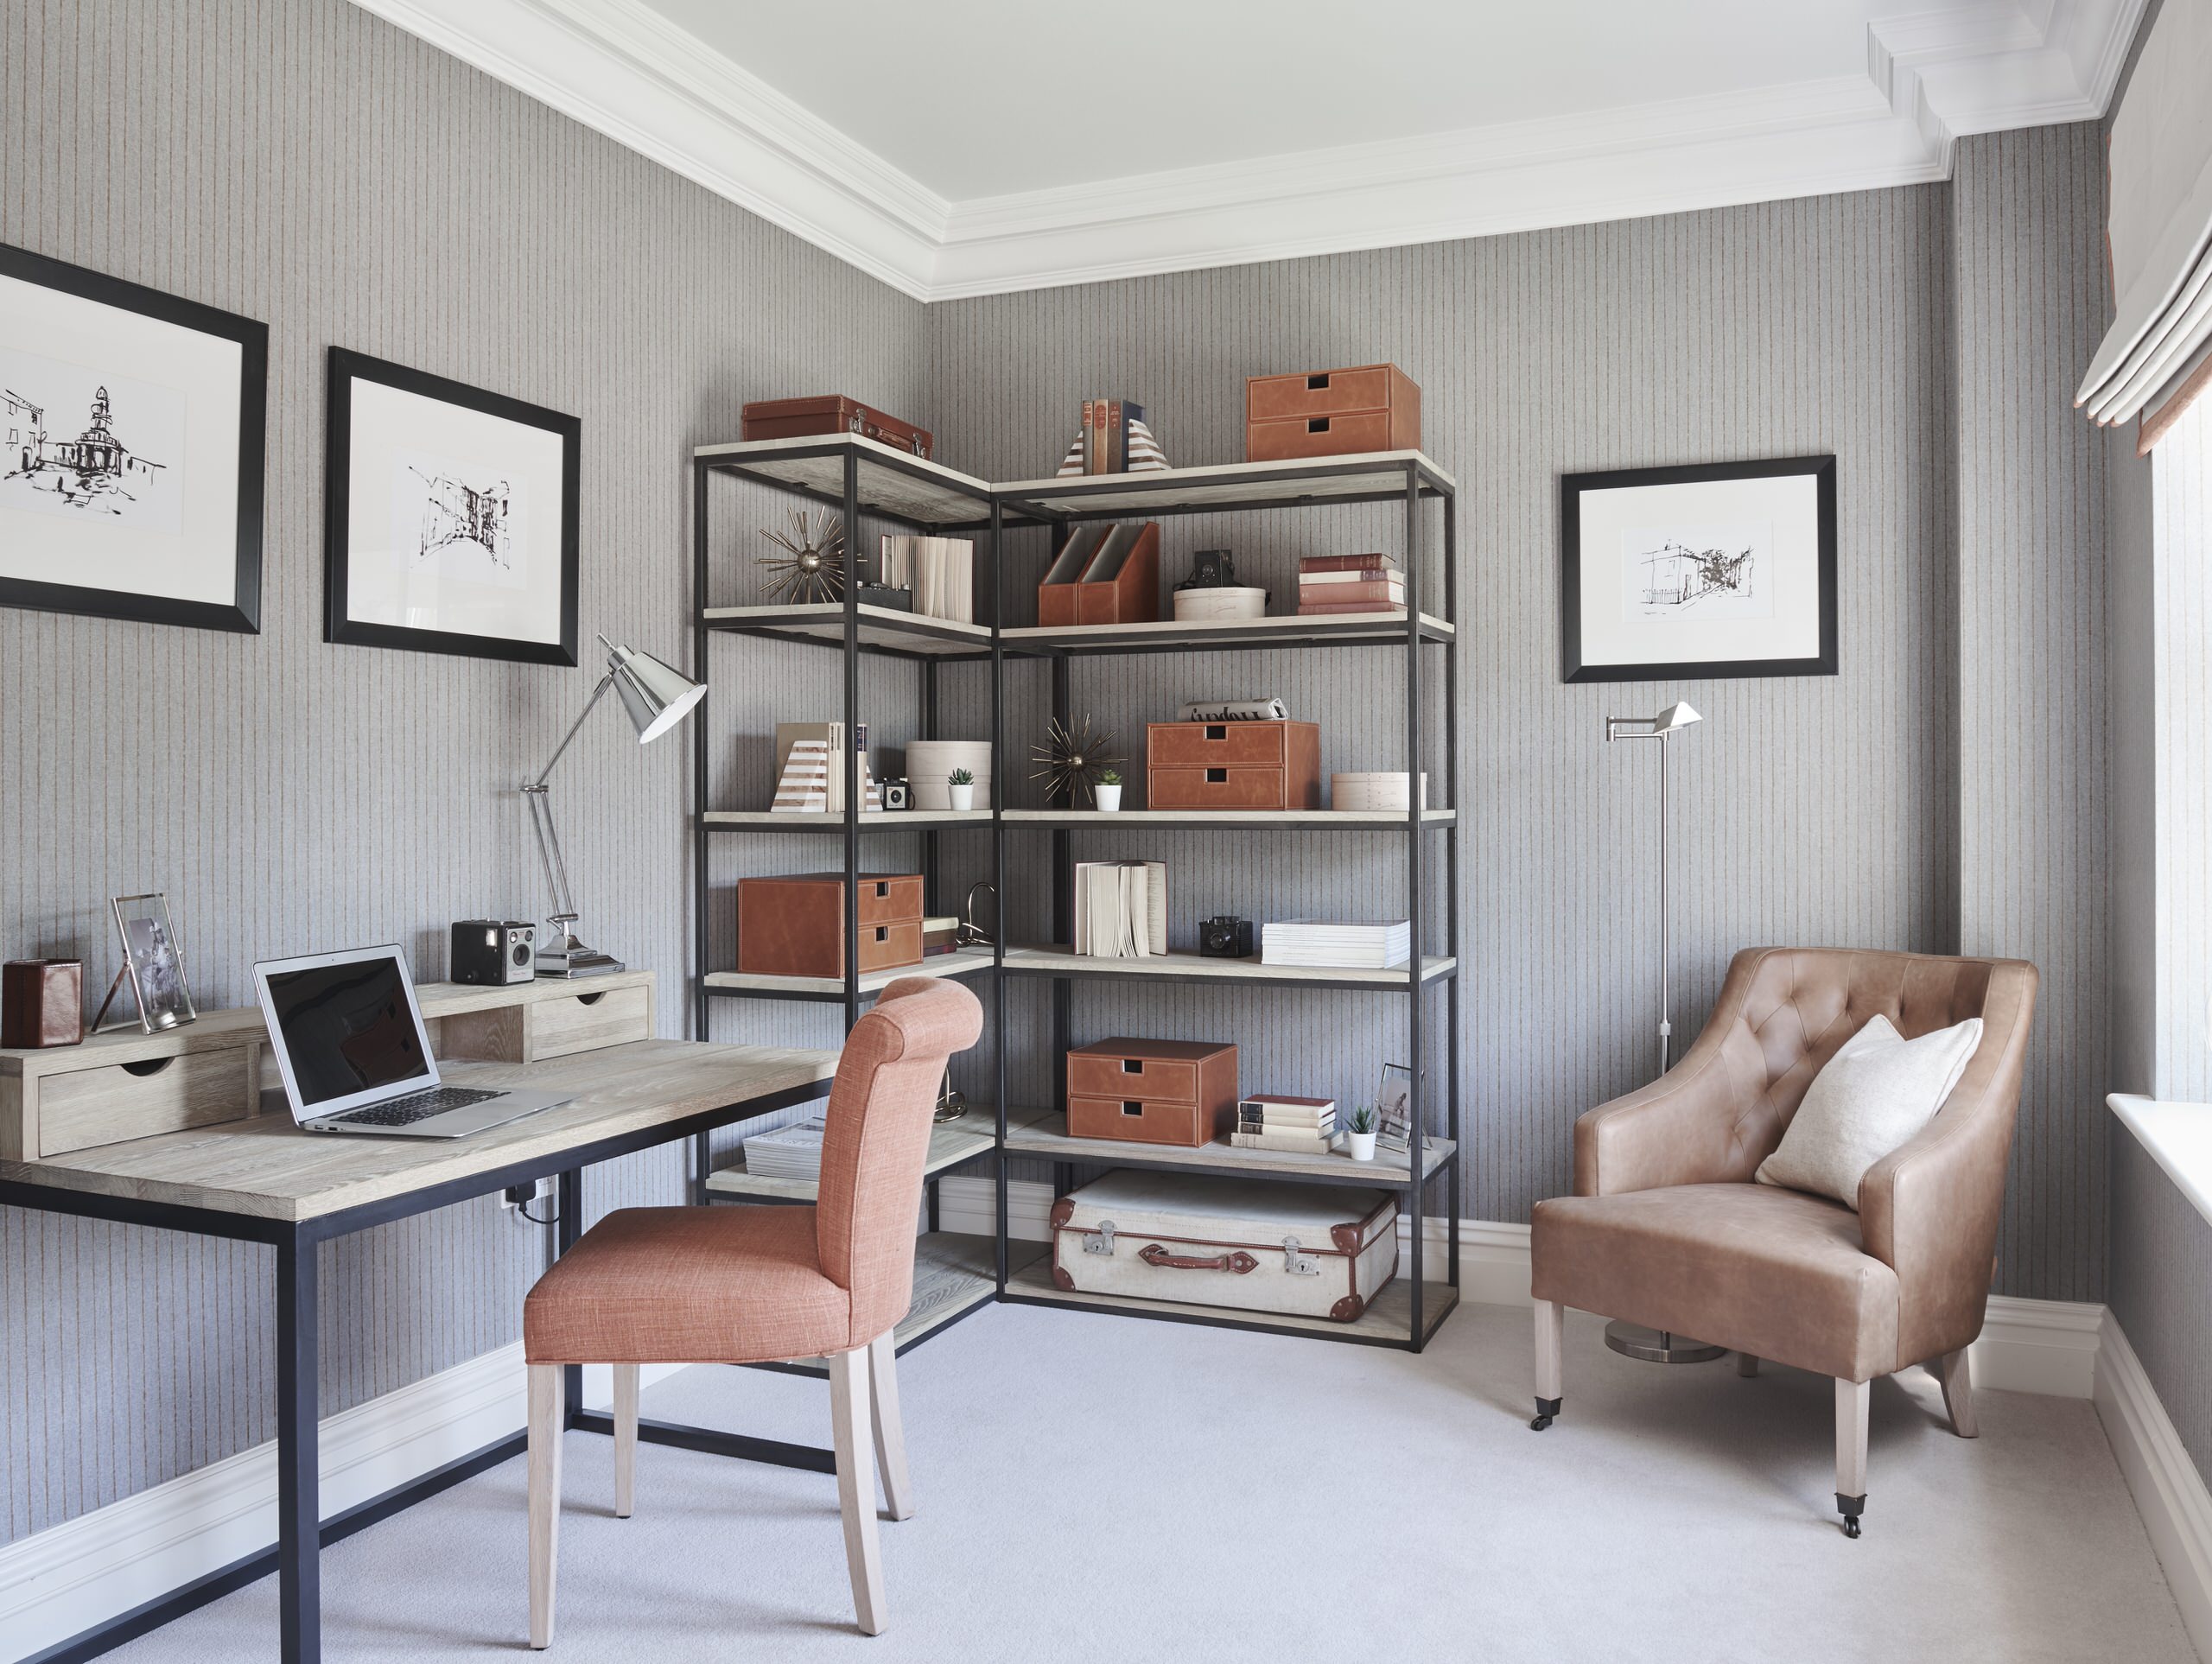 75 Carpeted Home Office Ideas You'll Love - March, 2022 | Houzz